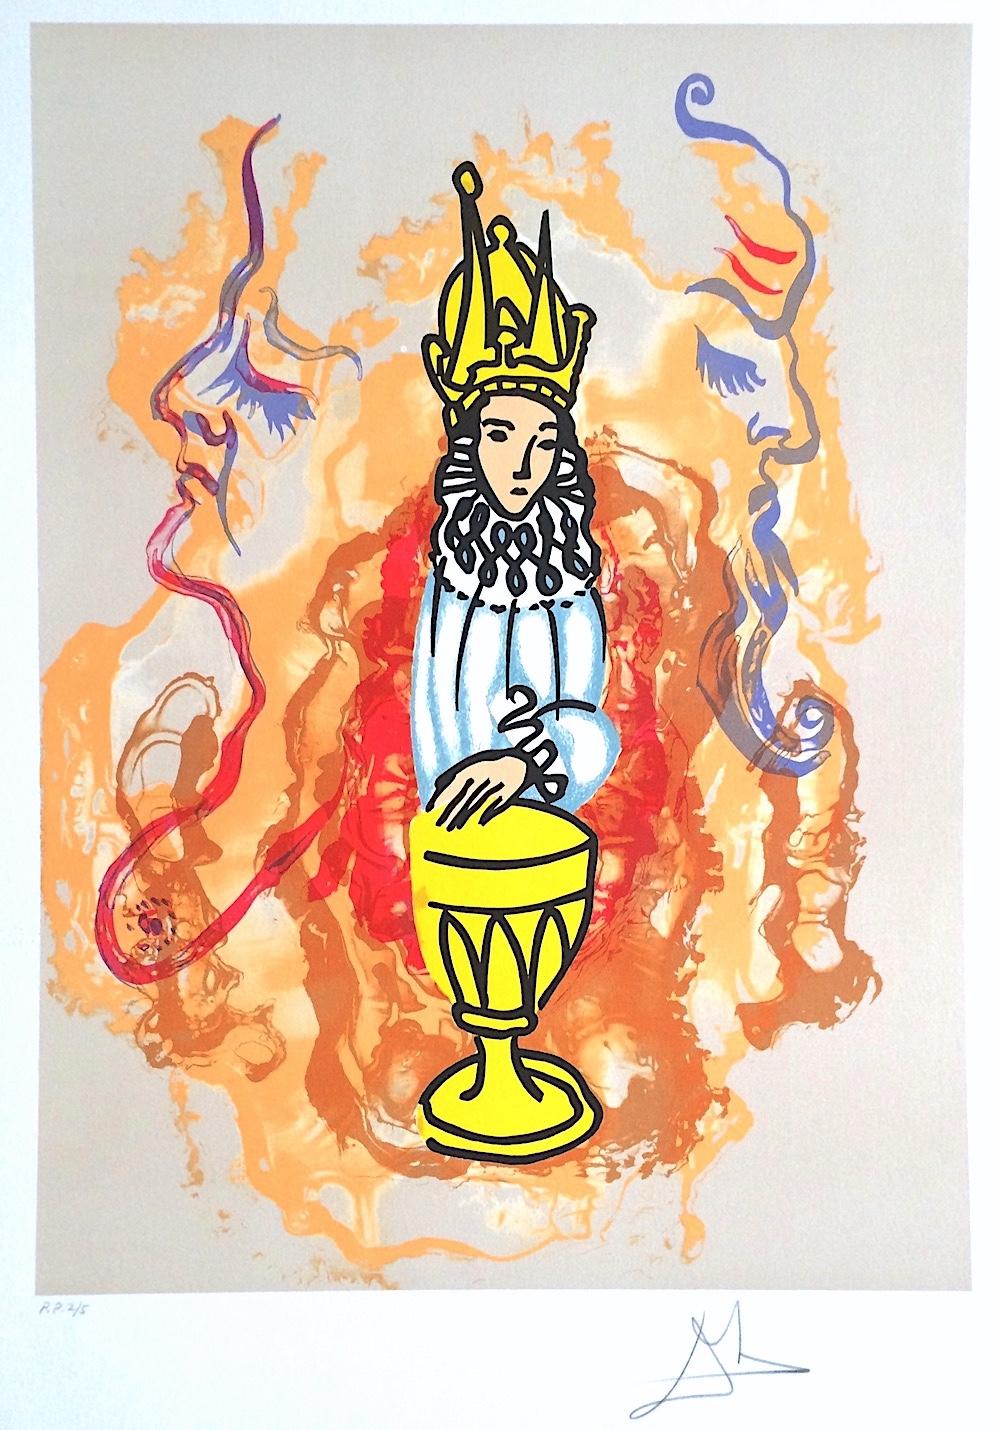 PRINCE OF CUPS 1979, Signed Lithograph on Arches, Tarot Card Series